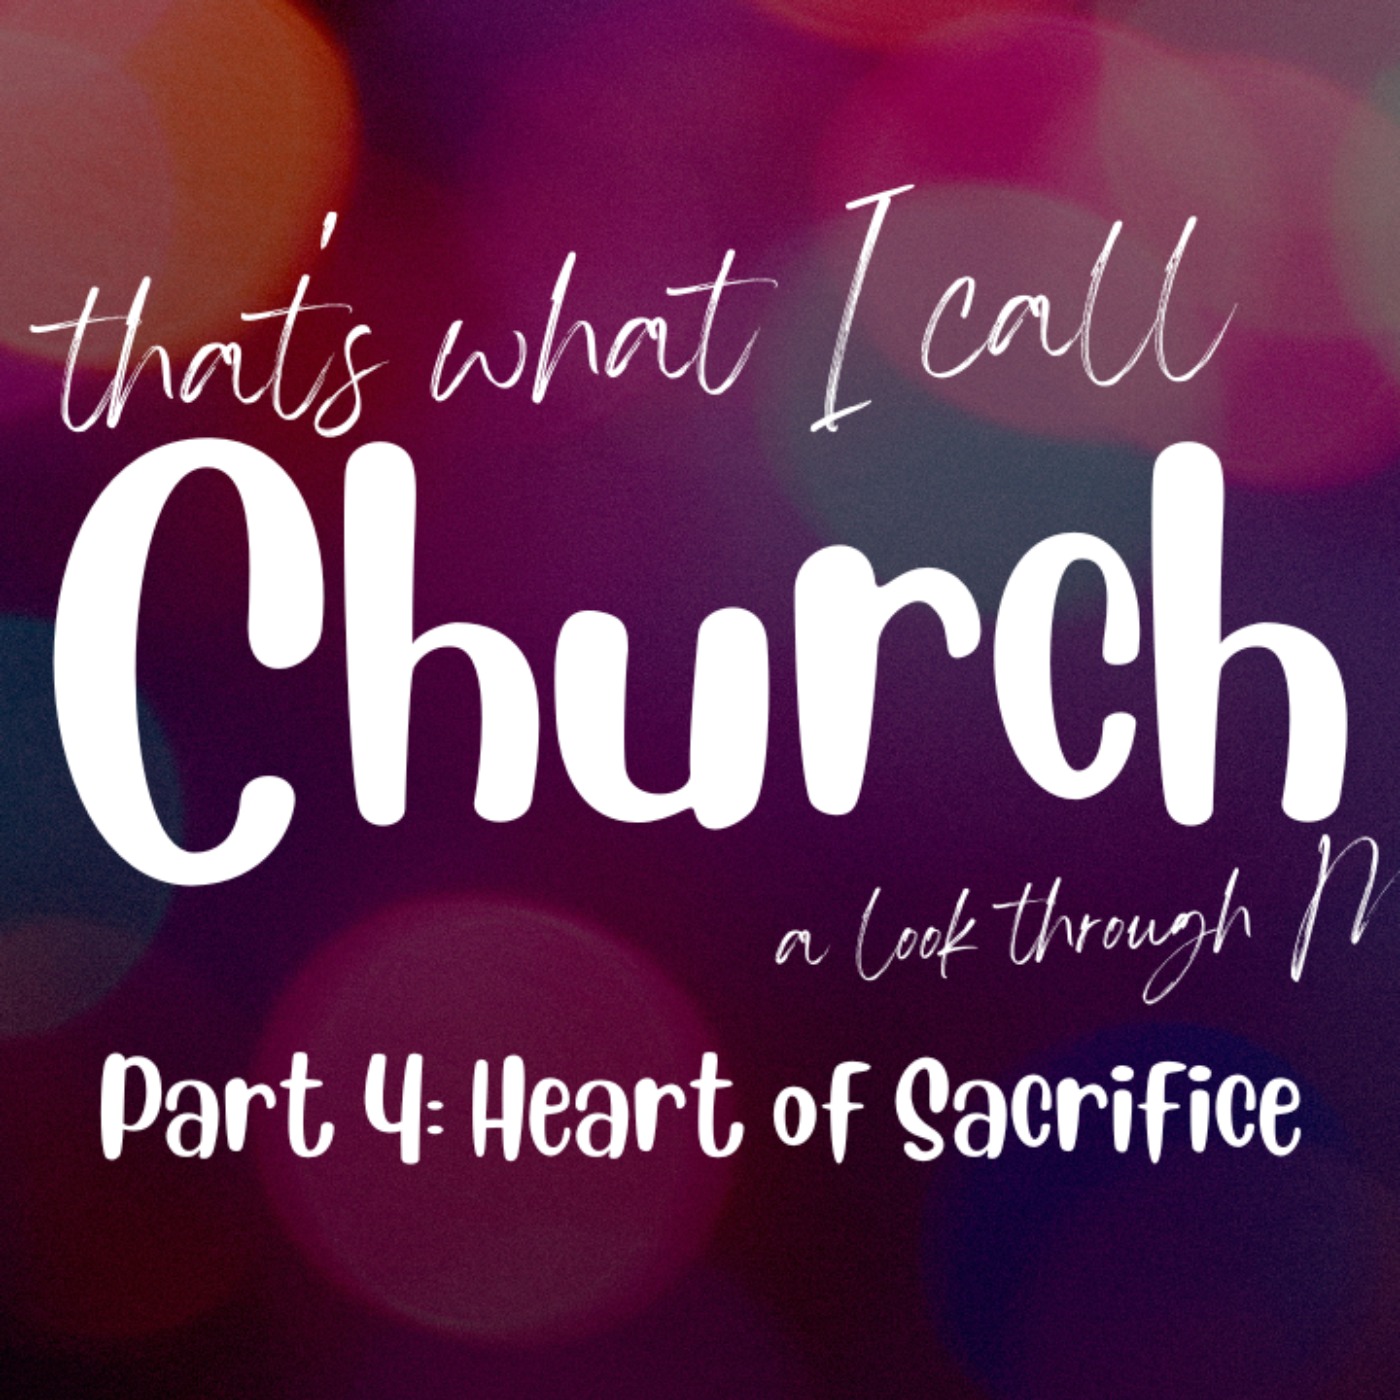 cover art for Now That's What I Call Church - Part 4: Heart of Sacrifice